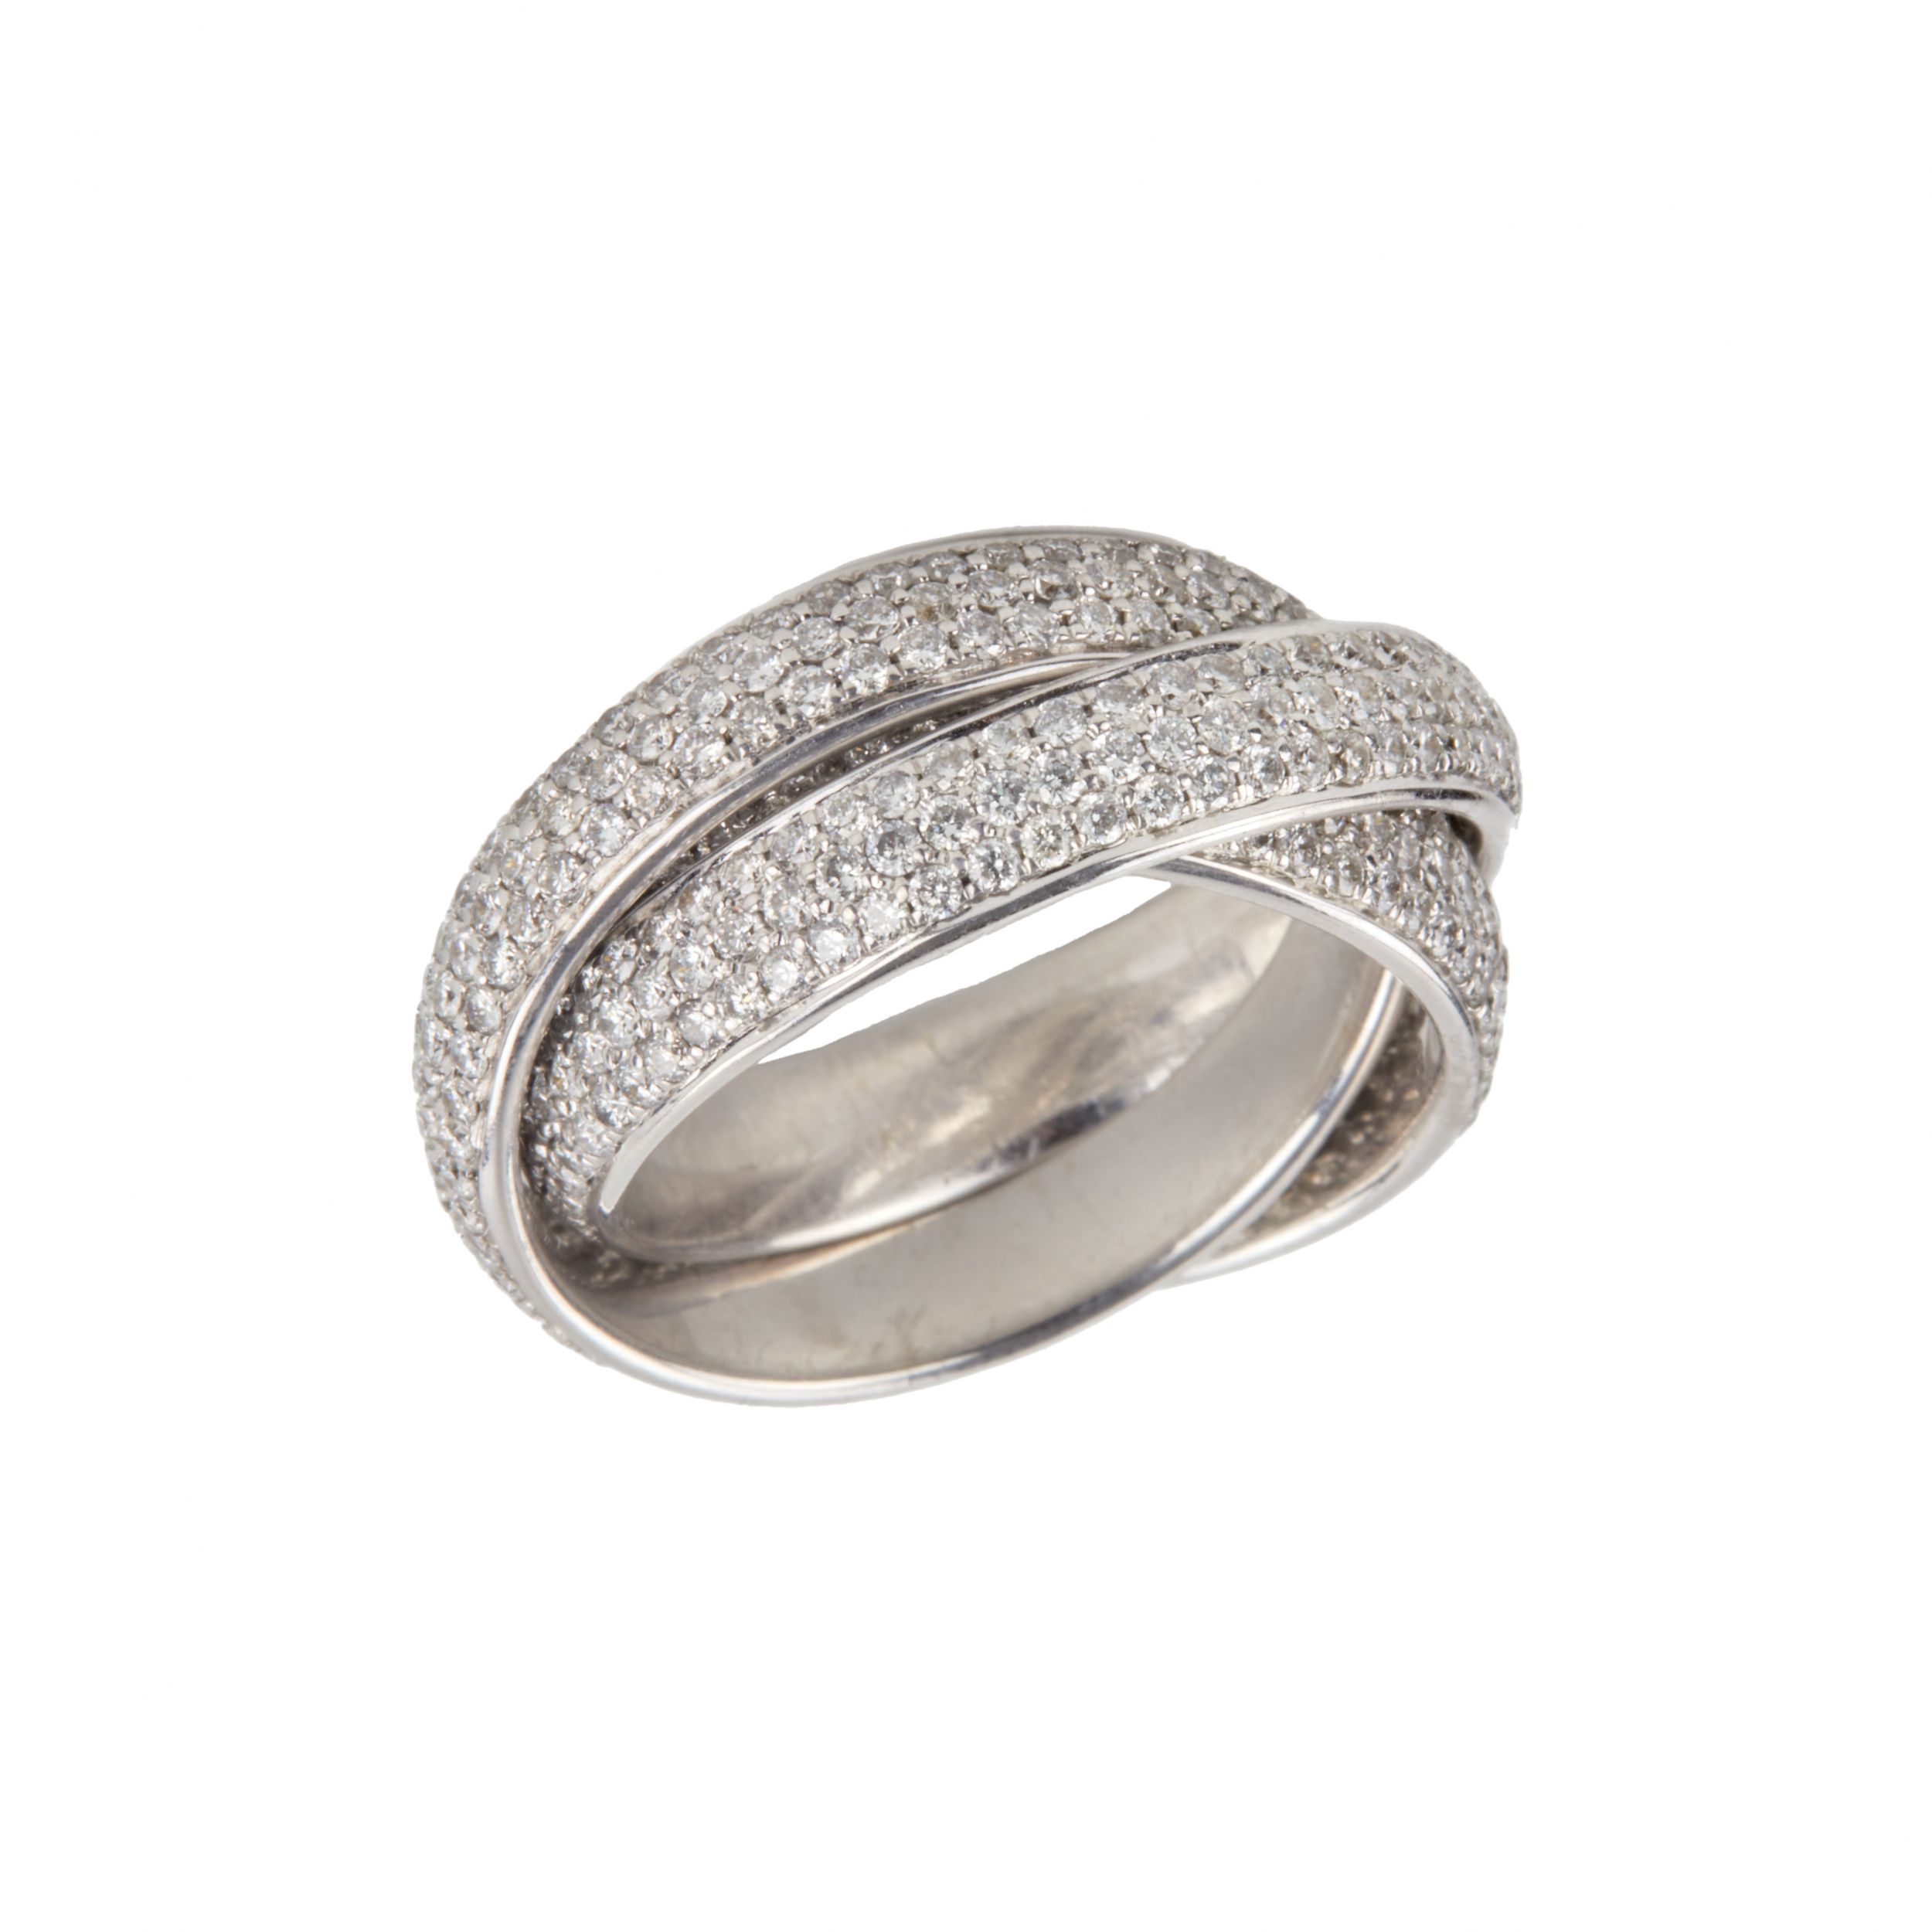 18K White gold ring with diamonds. - Image 2 of 6